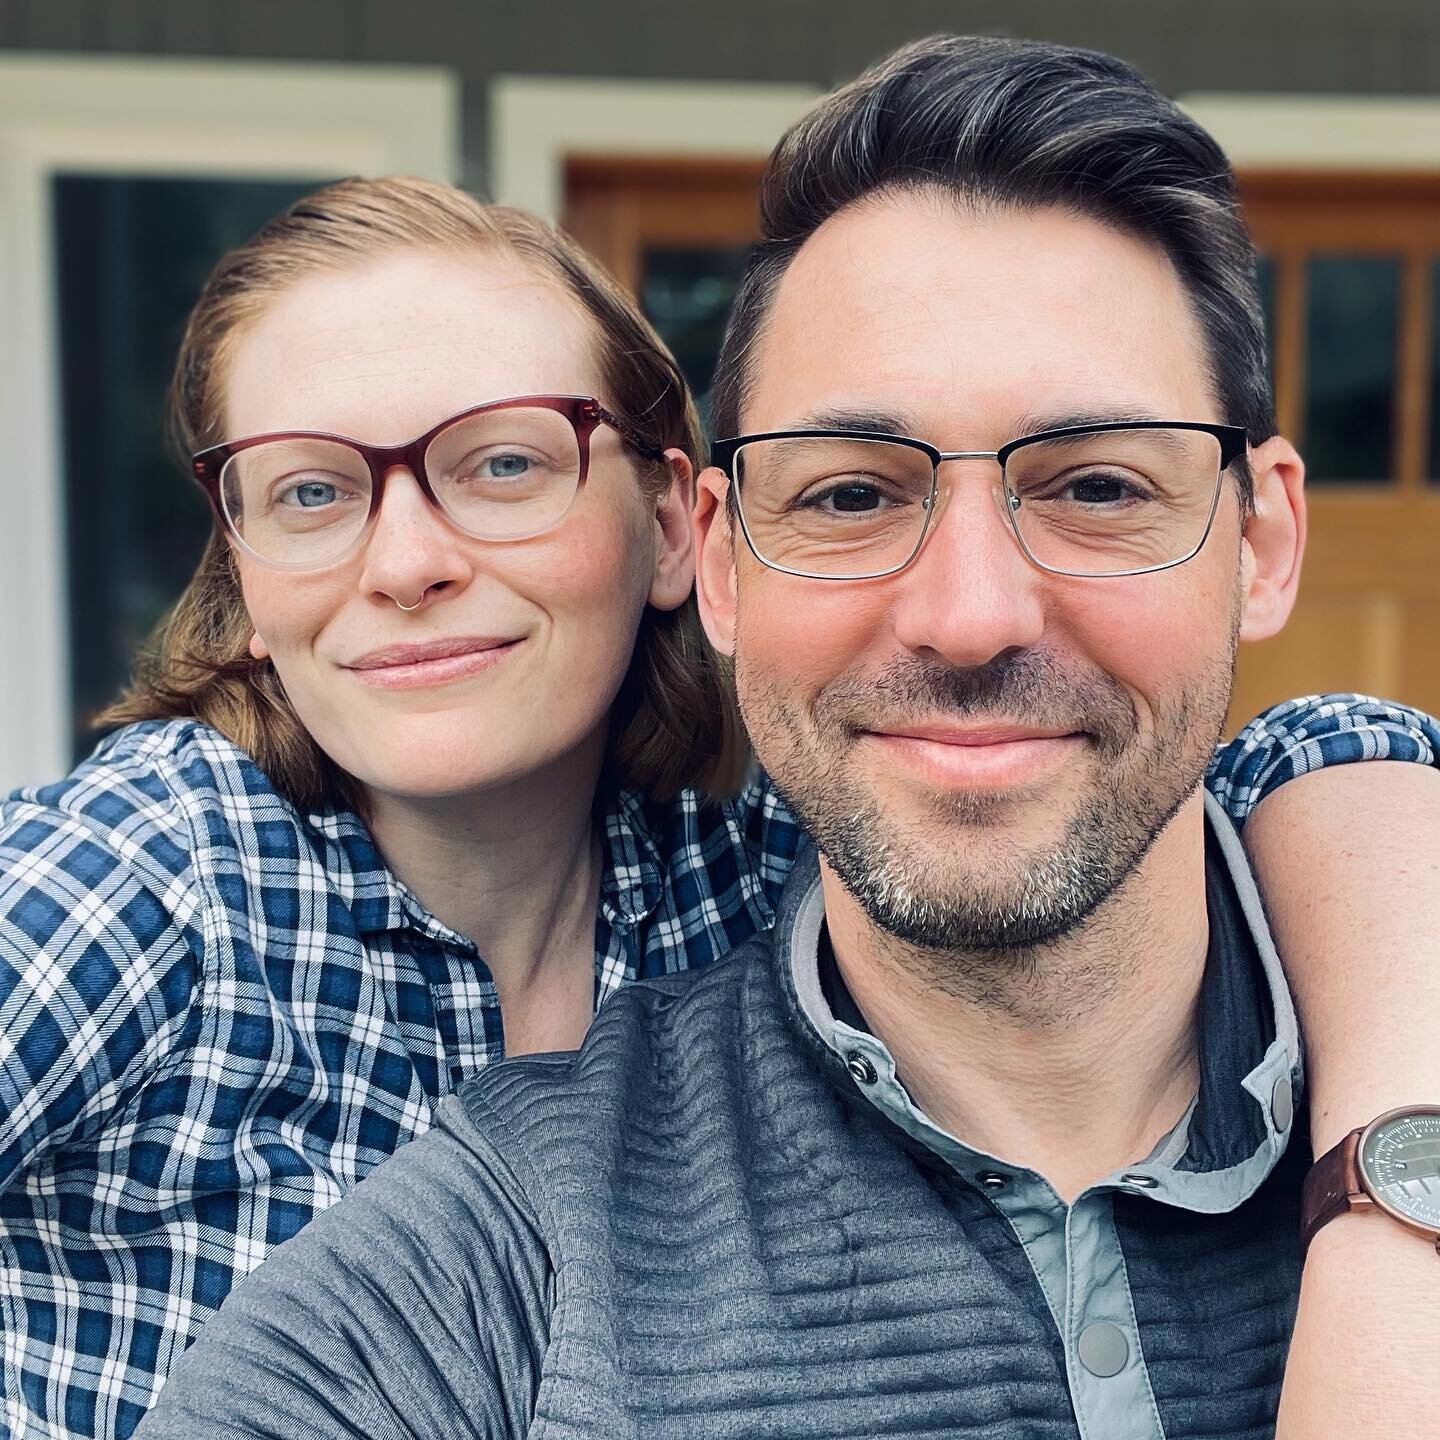 Meet the team! We&rsquo;ve been sharing content of life on Bainbridge Island and the beautiful homes we get to represent, but have yet to give you a face behind the name! 
We&rsquo;re Daniel Moskin and Hannah Vitale the people behind the partnership.